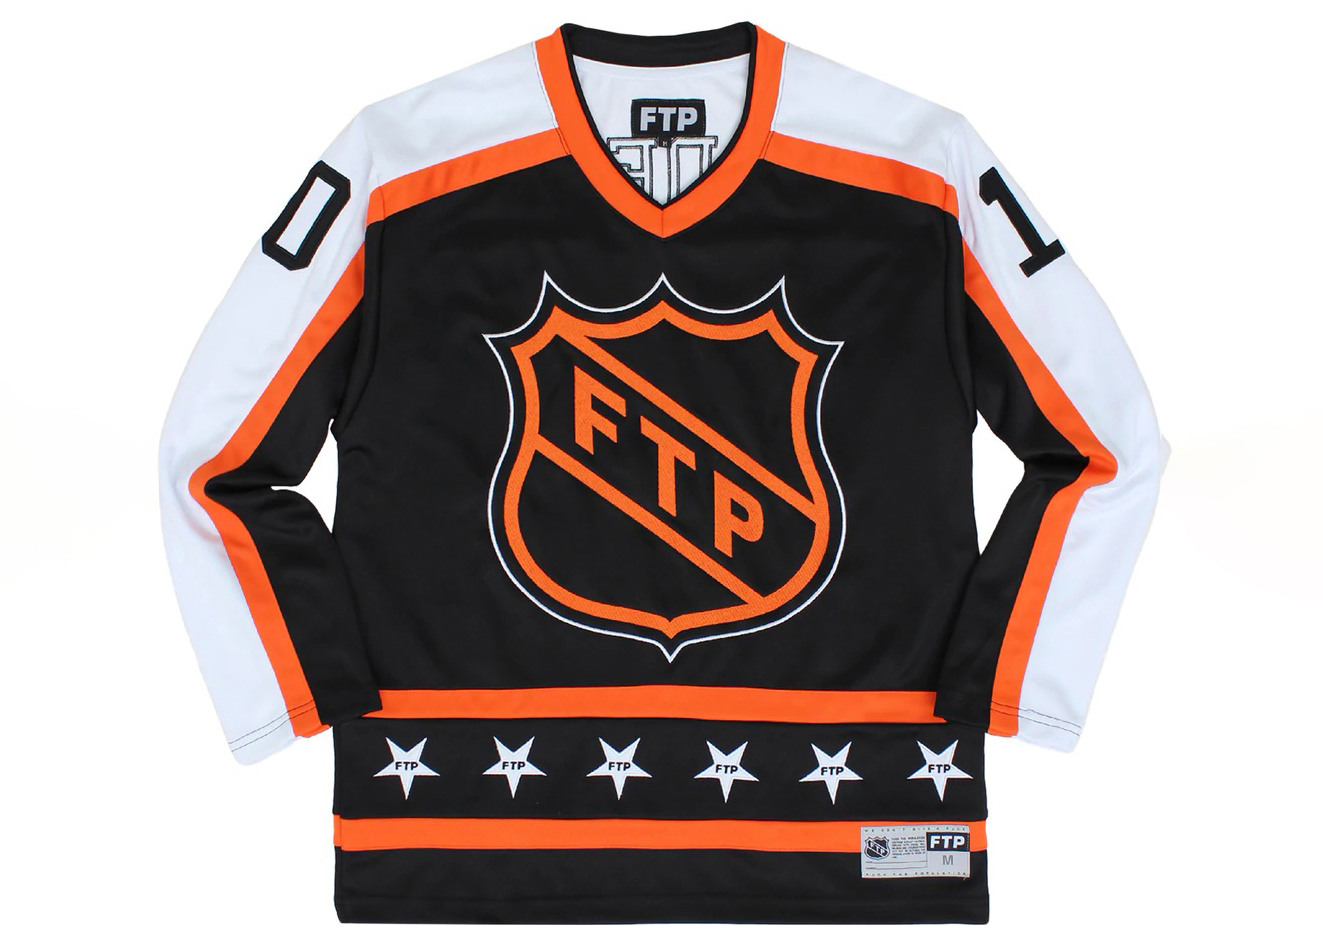 FTP Made In Hell Hockey Jersey Black Men's   SS   US